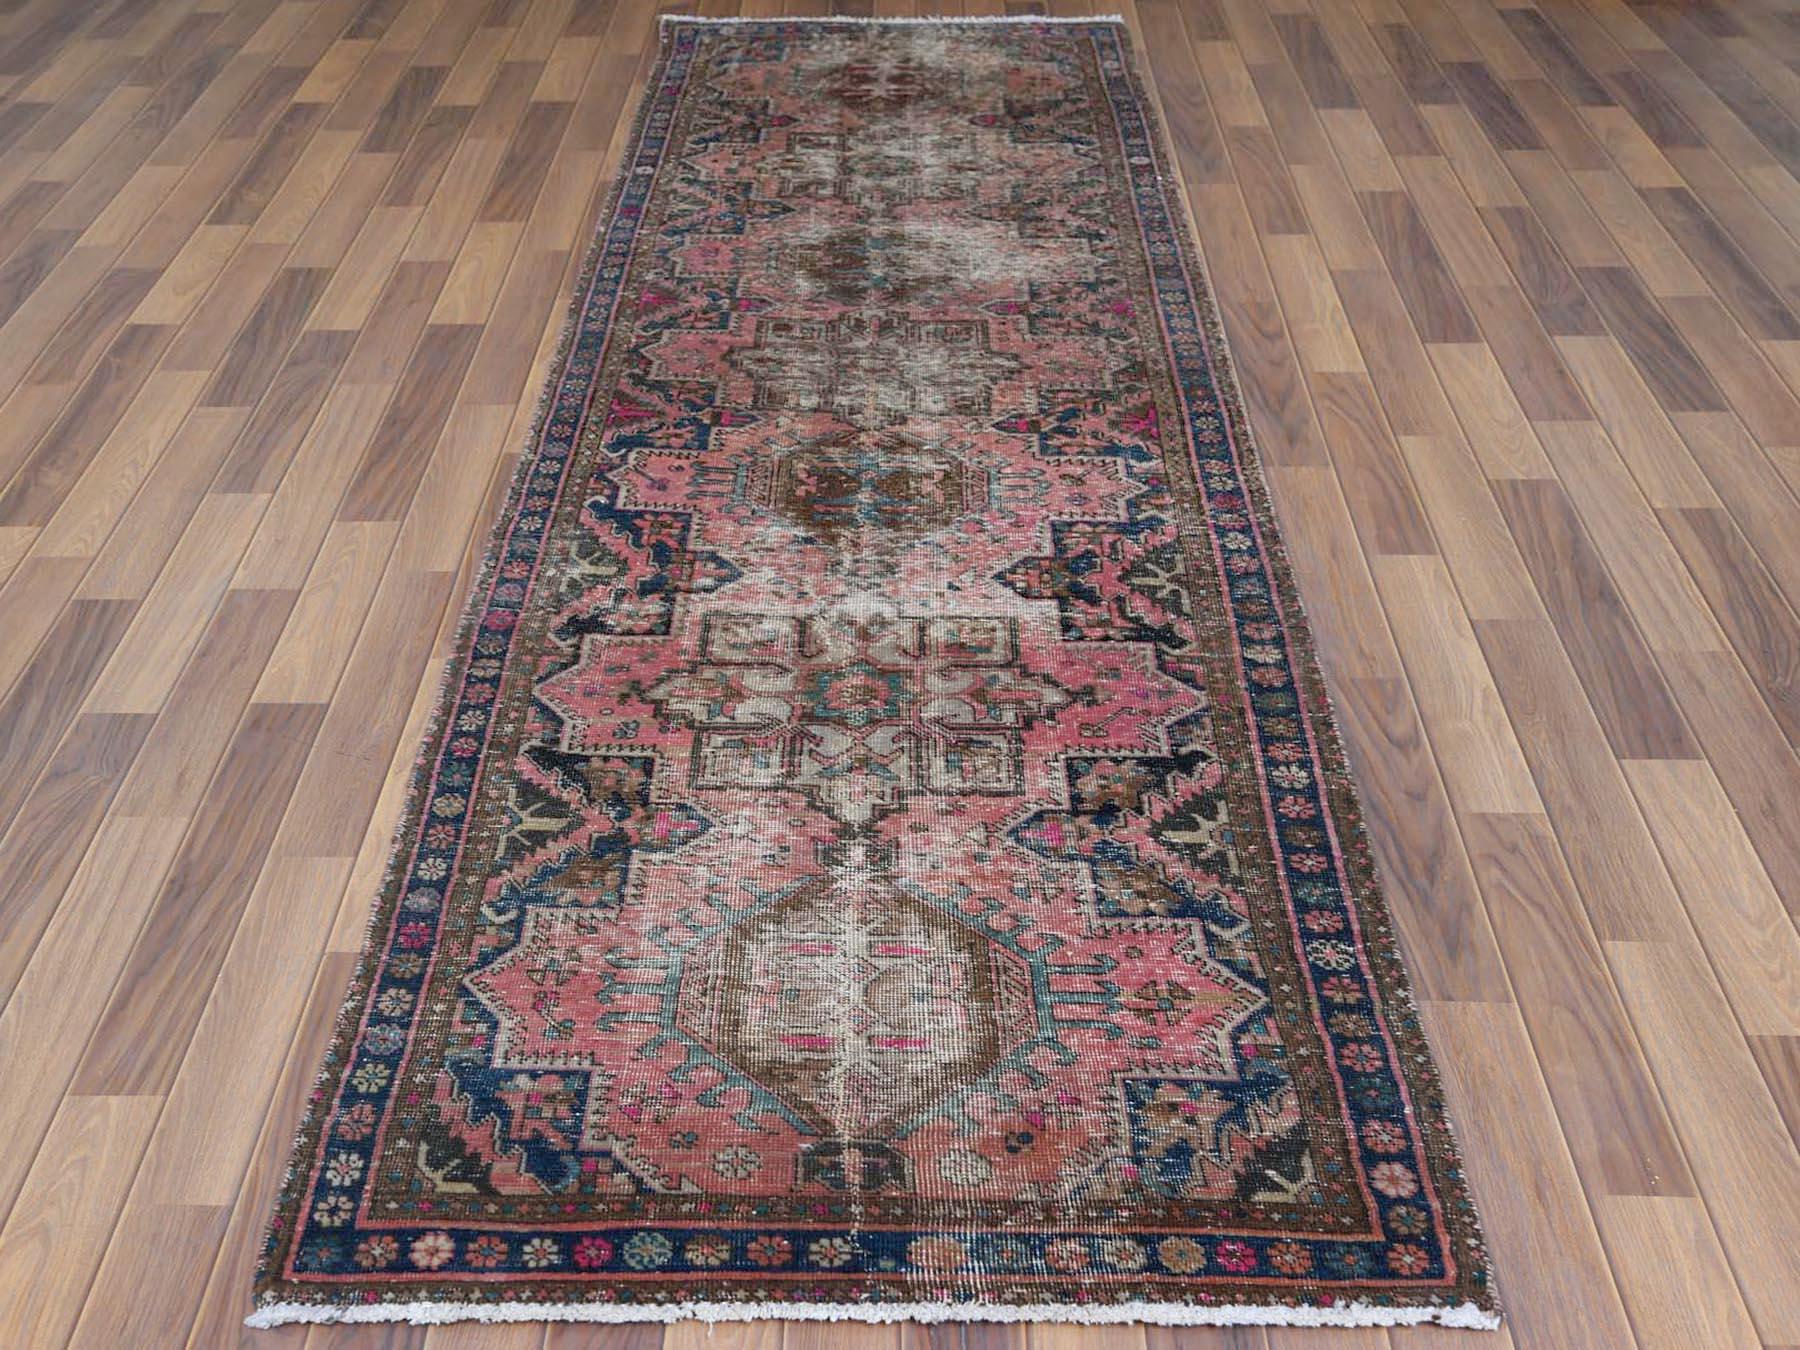 This fabulous hand-knotted carpet has been created and designed for extra strength and durability. This rug has been handcrafted for weeks in the traditional method that is used to make
Exact rug size in feet and inches : 3'3